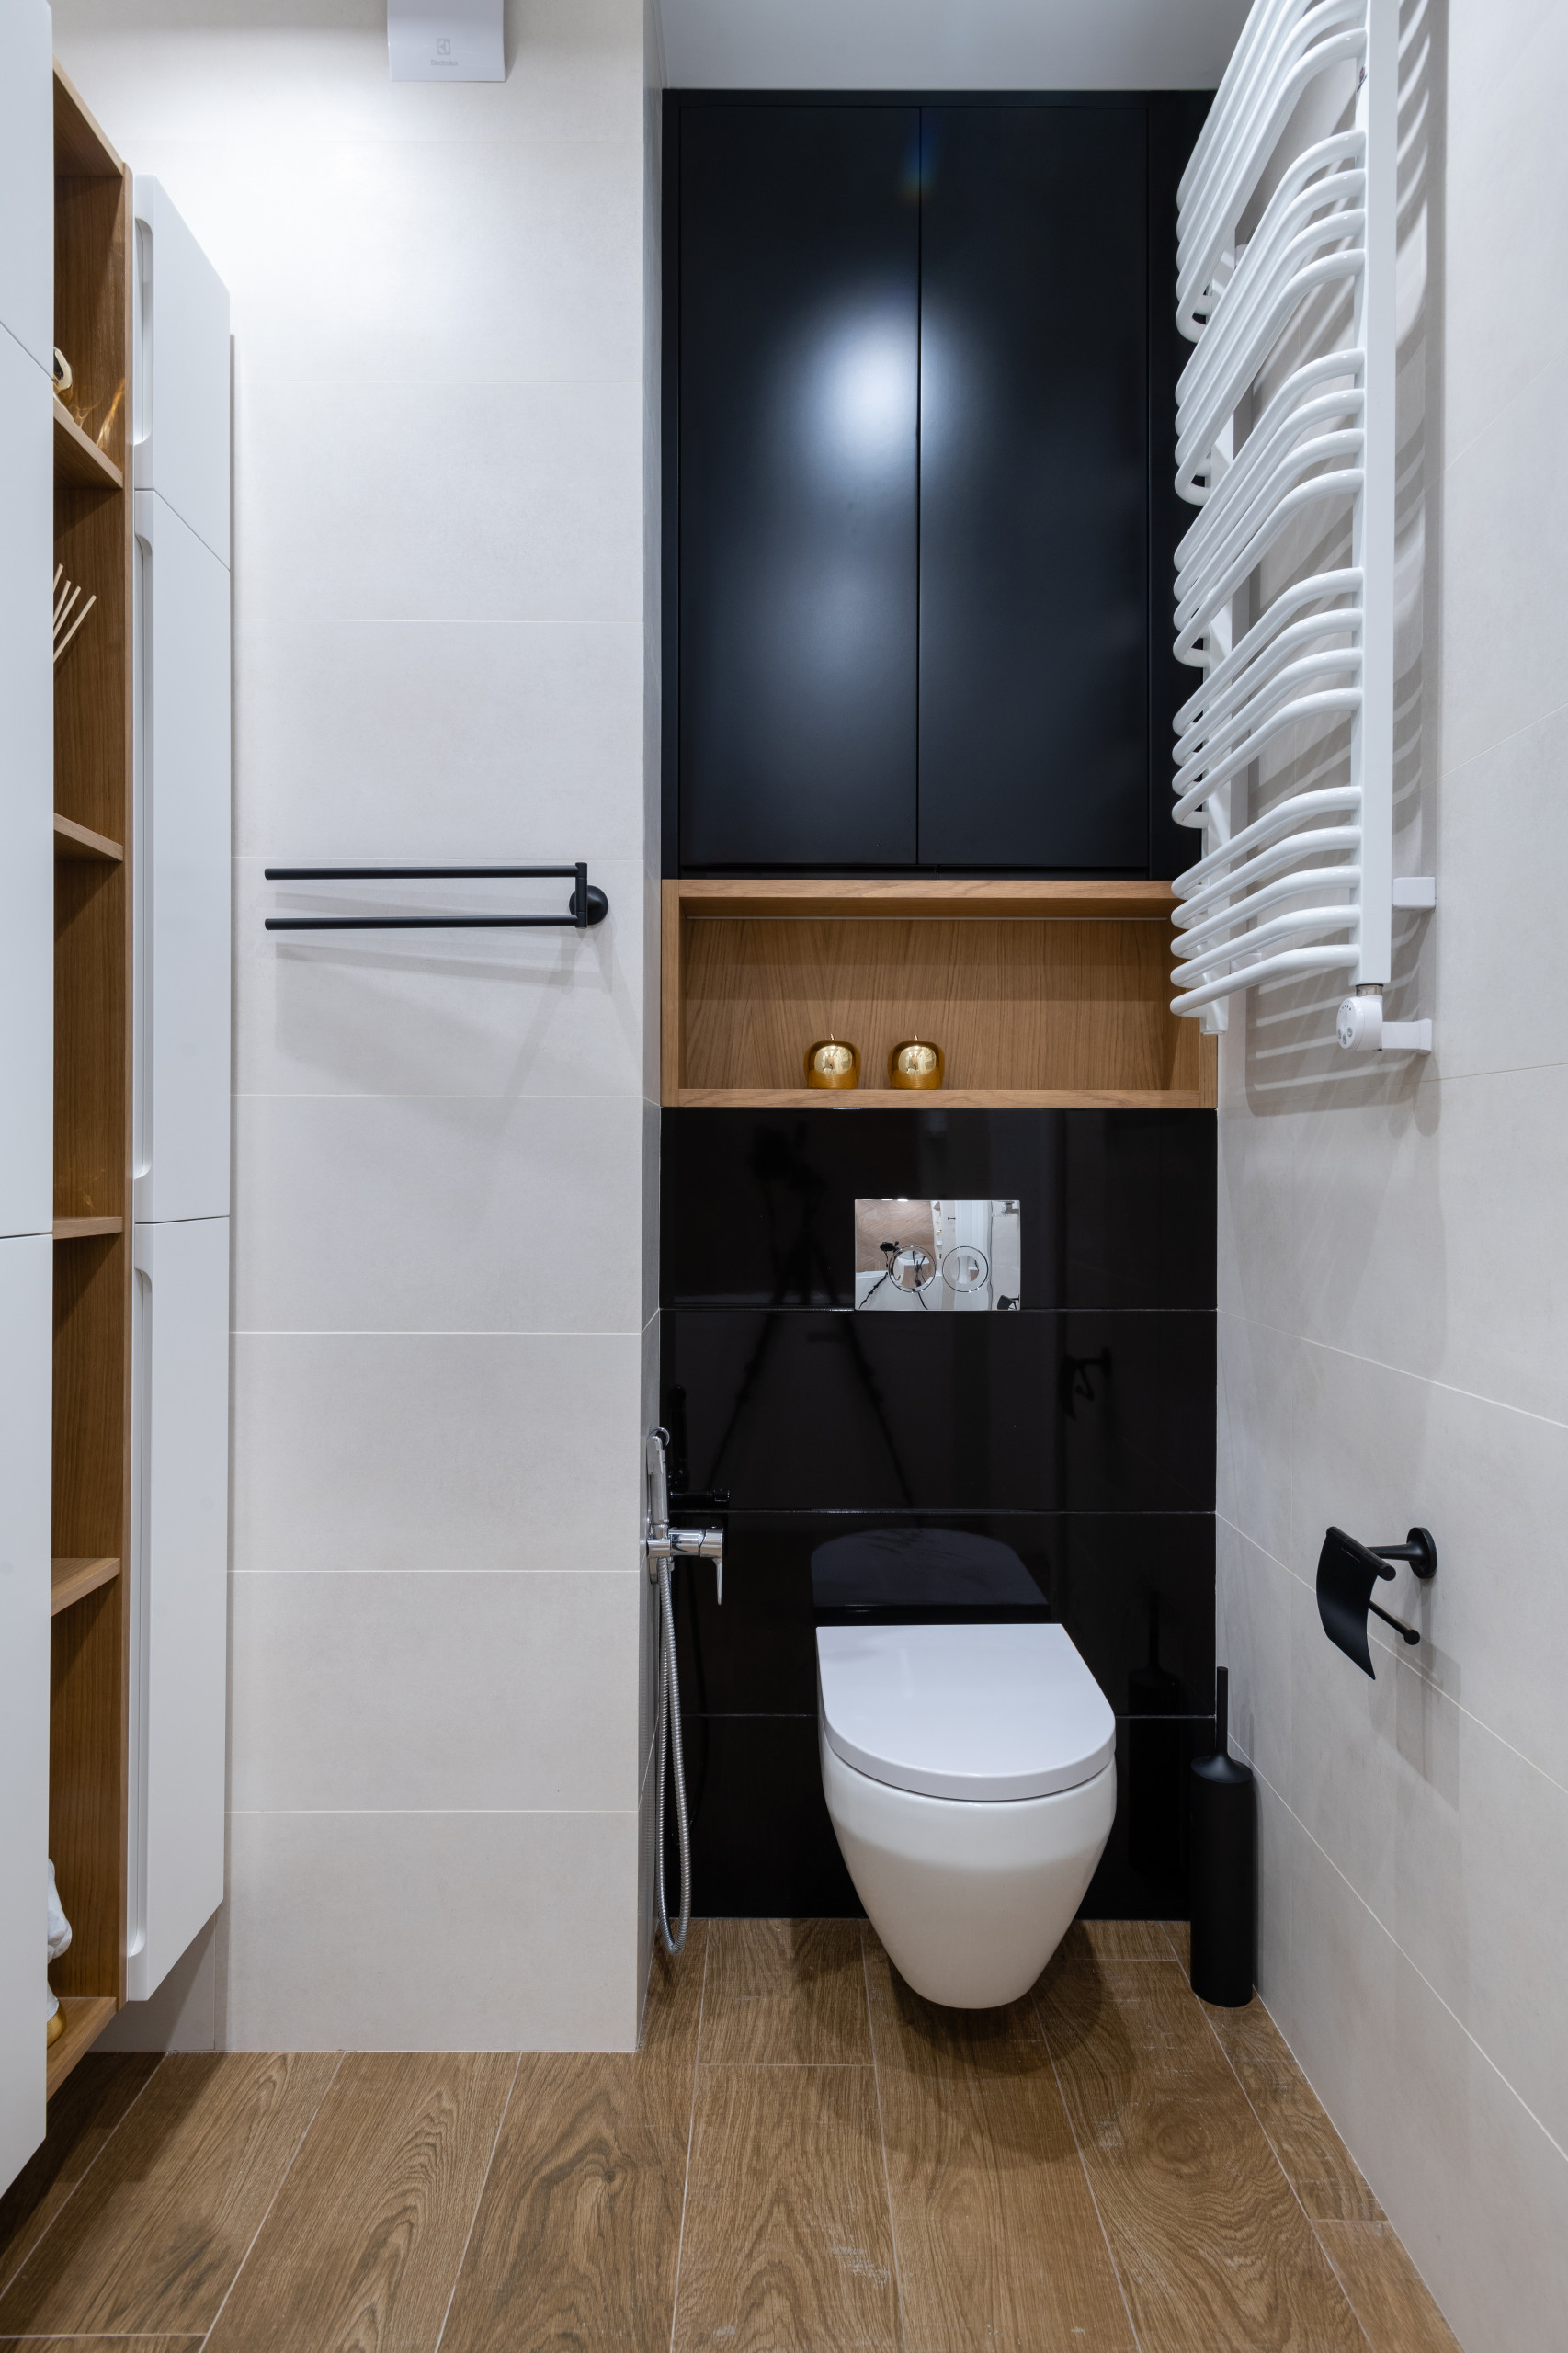 75 Toilet Room Ideas You'll Love - October, 2022 | Houzz